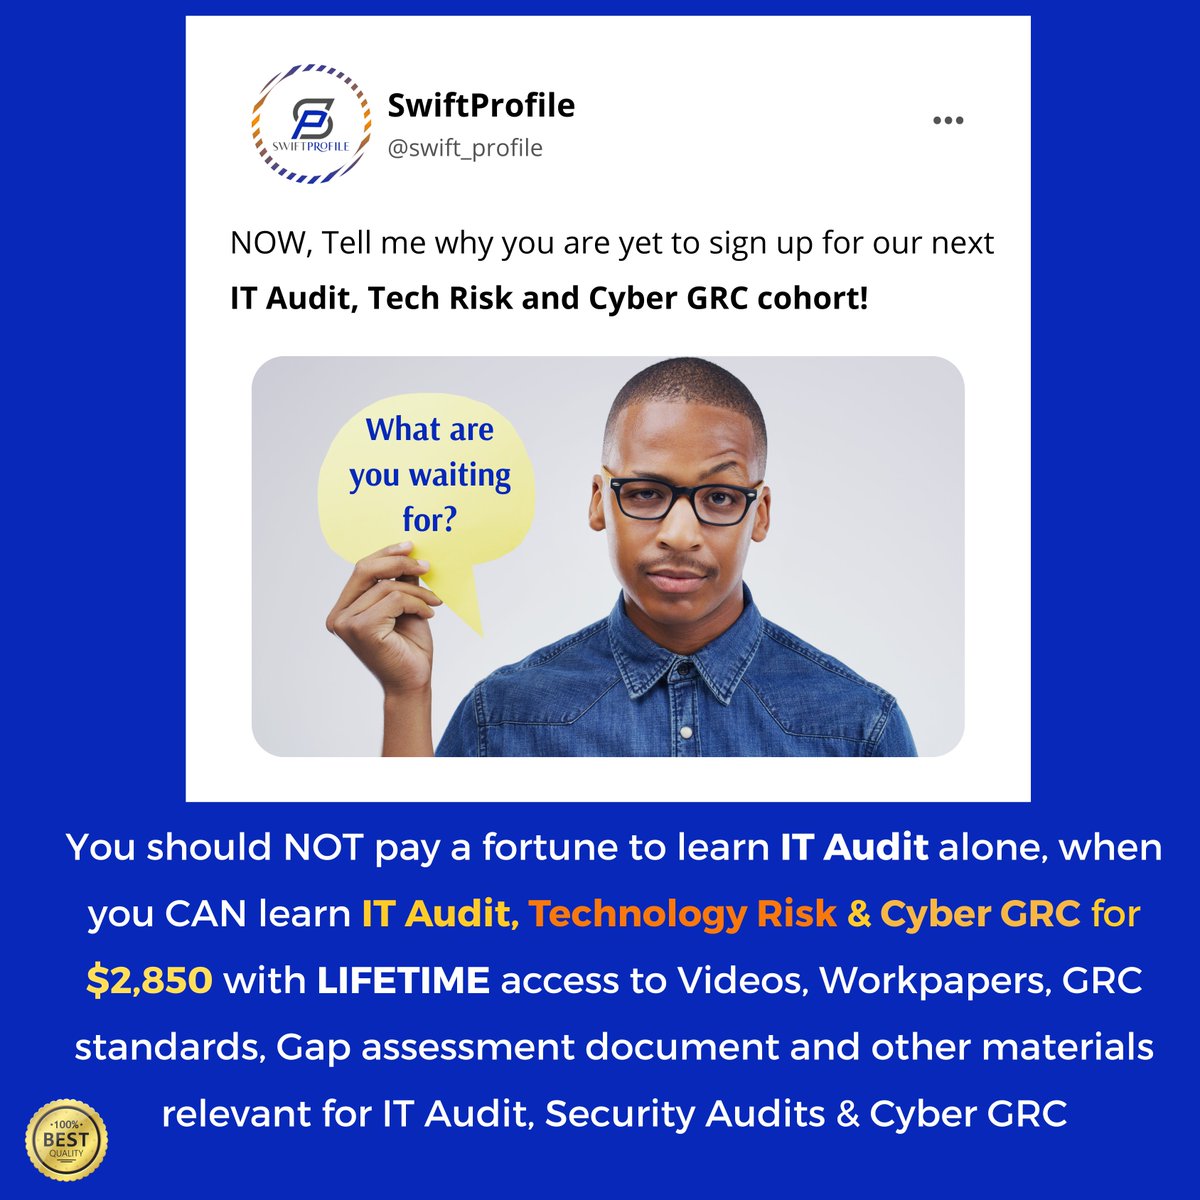 IT Auditors and Cyber GRC professionals are in high demand. In the US, IT Auditors earn well over $100k and come with the flexibility of work anywhere.

#itaudit #itauditor #cybergrc #ıso27001 #securityaudit #techriskbysak #itrisk #grc